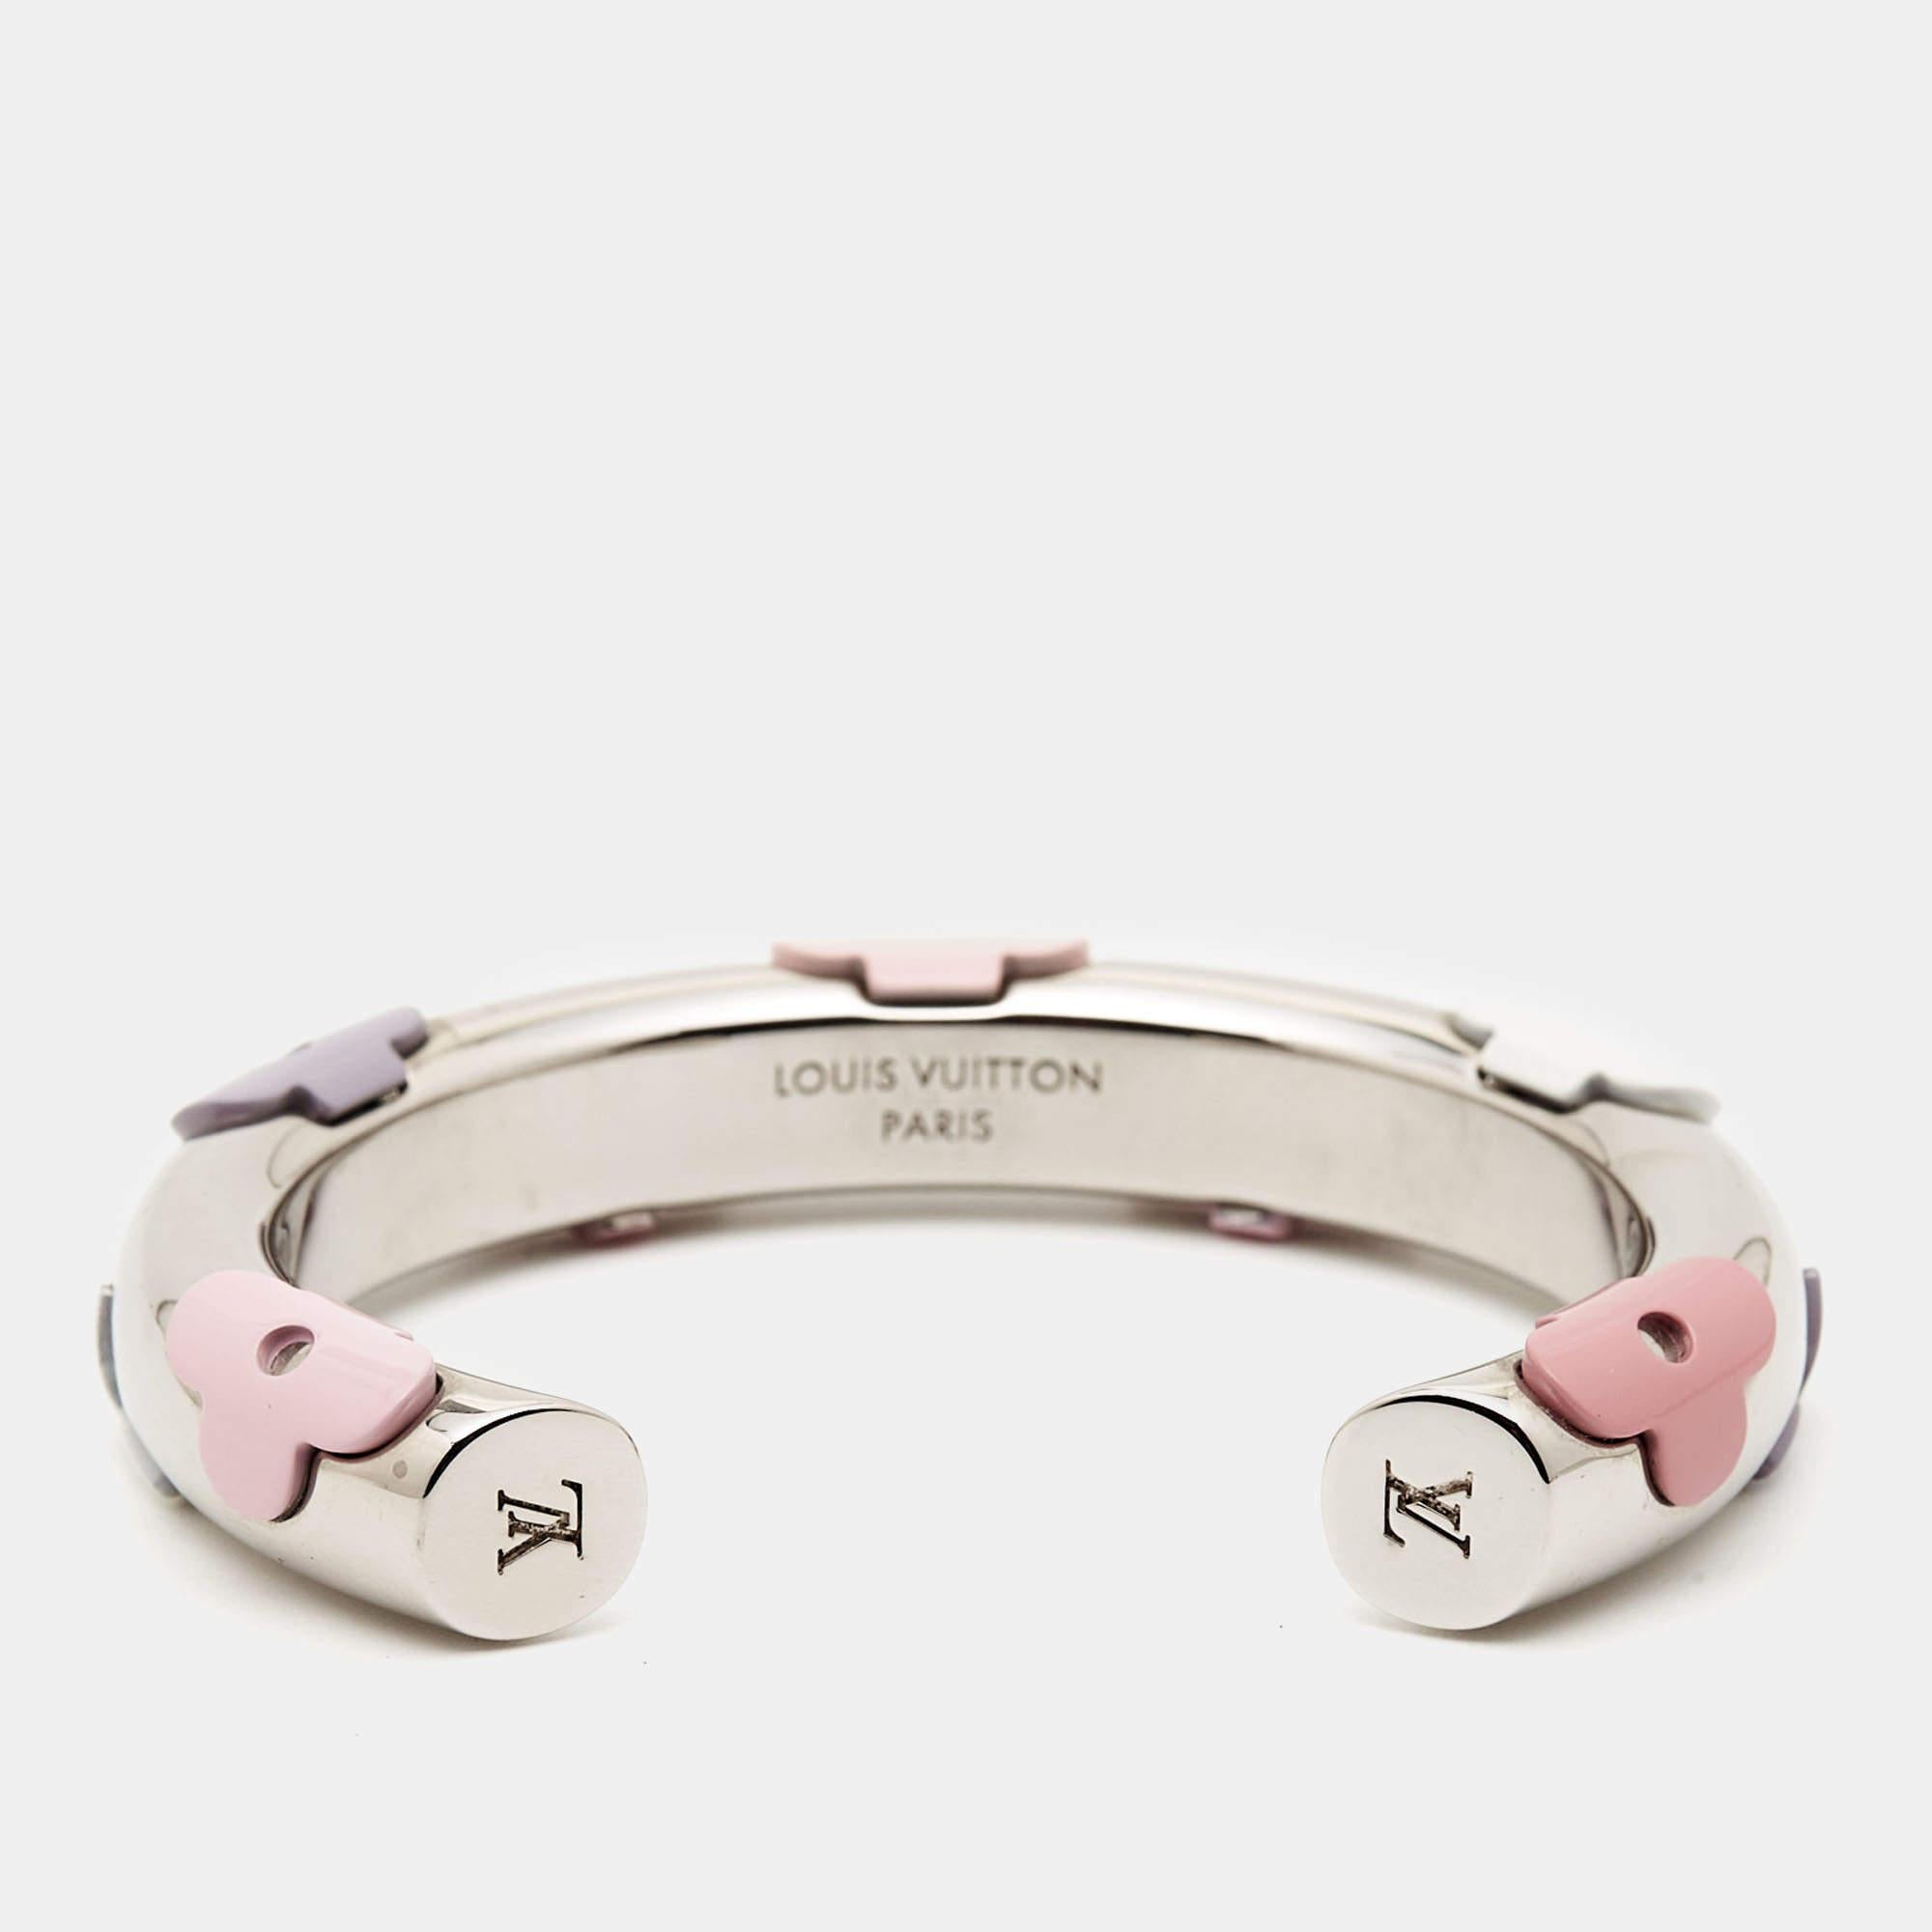 The Louis Vuitton bracelet exudes sophistication with its iconic monogram pattern made from resin. The silver-tone metal cuff showcases meticulous craftsmanship, seamlessly blending luxury and contemporary style. This accessory is a statement piece,